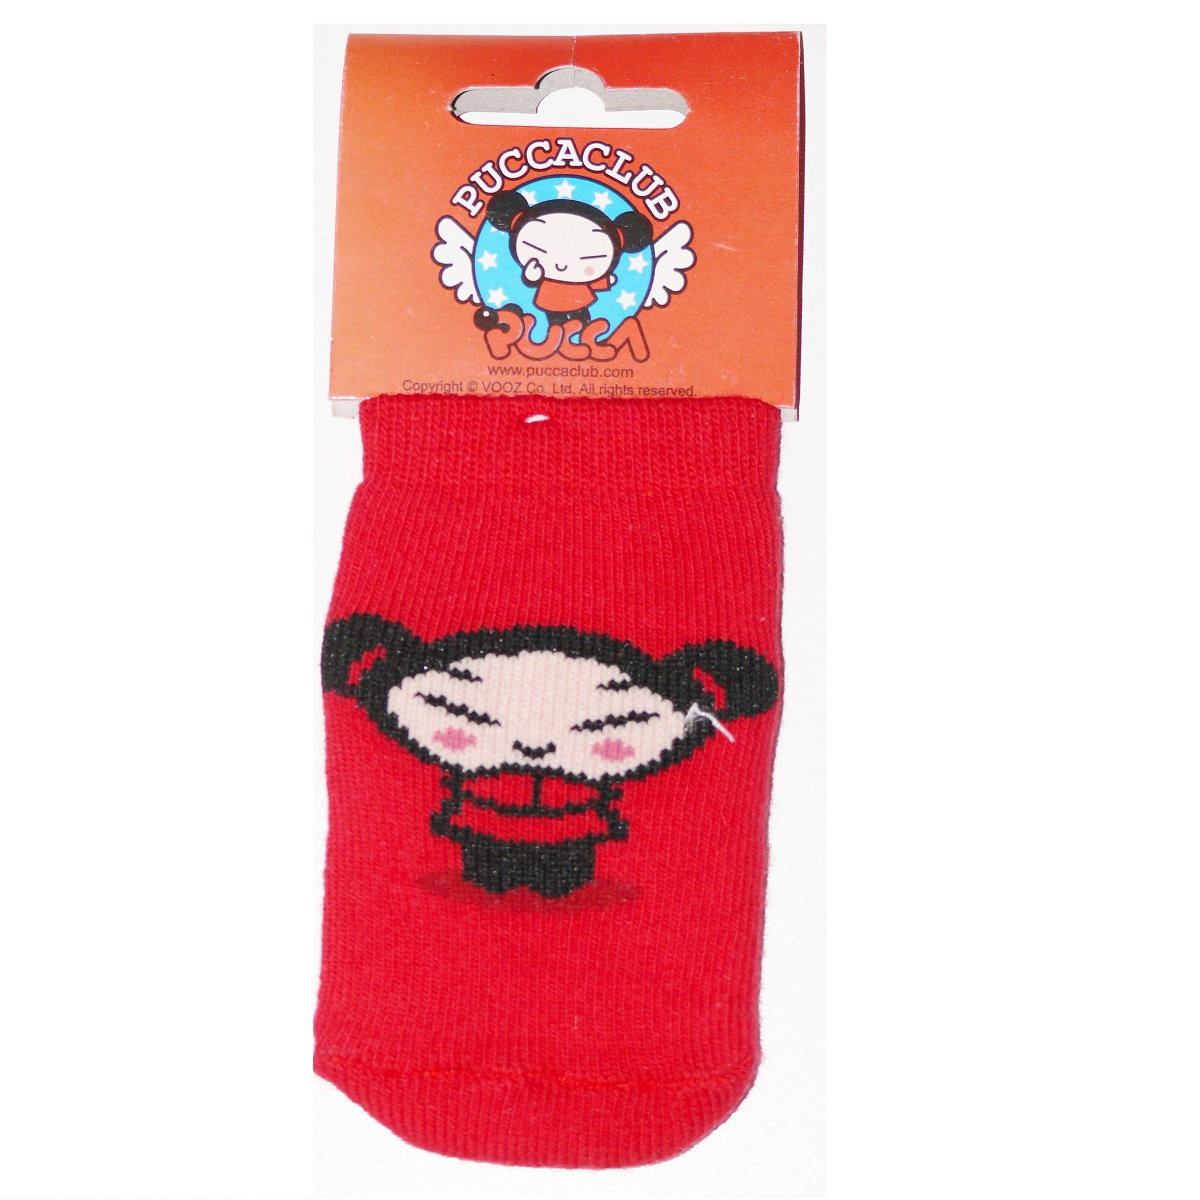 Chaussette tlphone portable Pucca